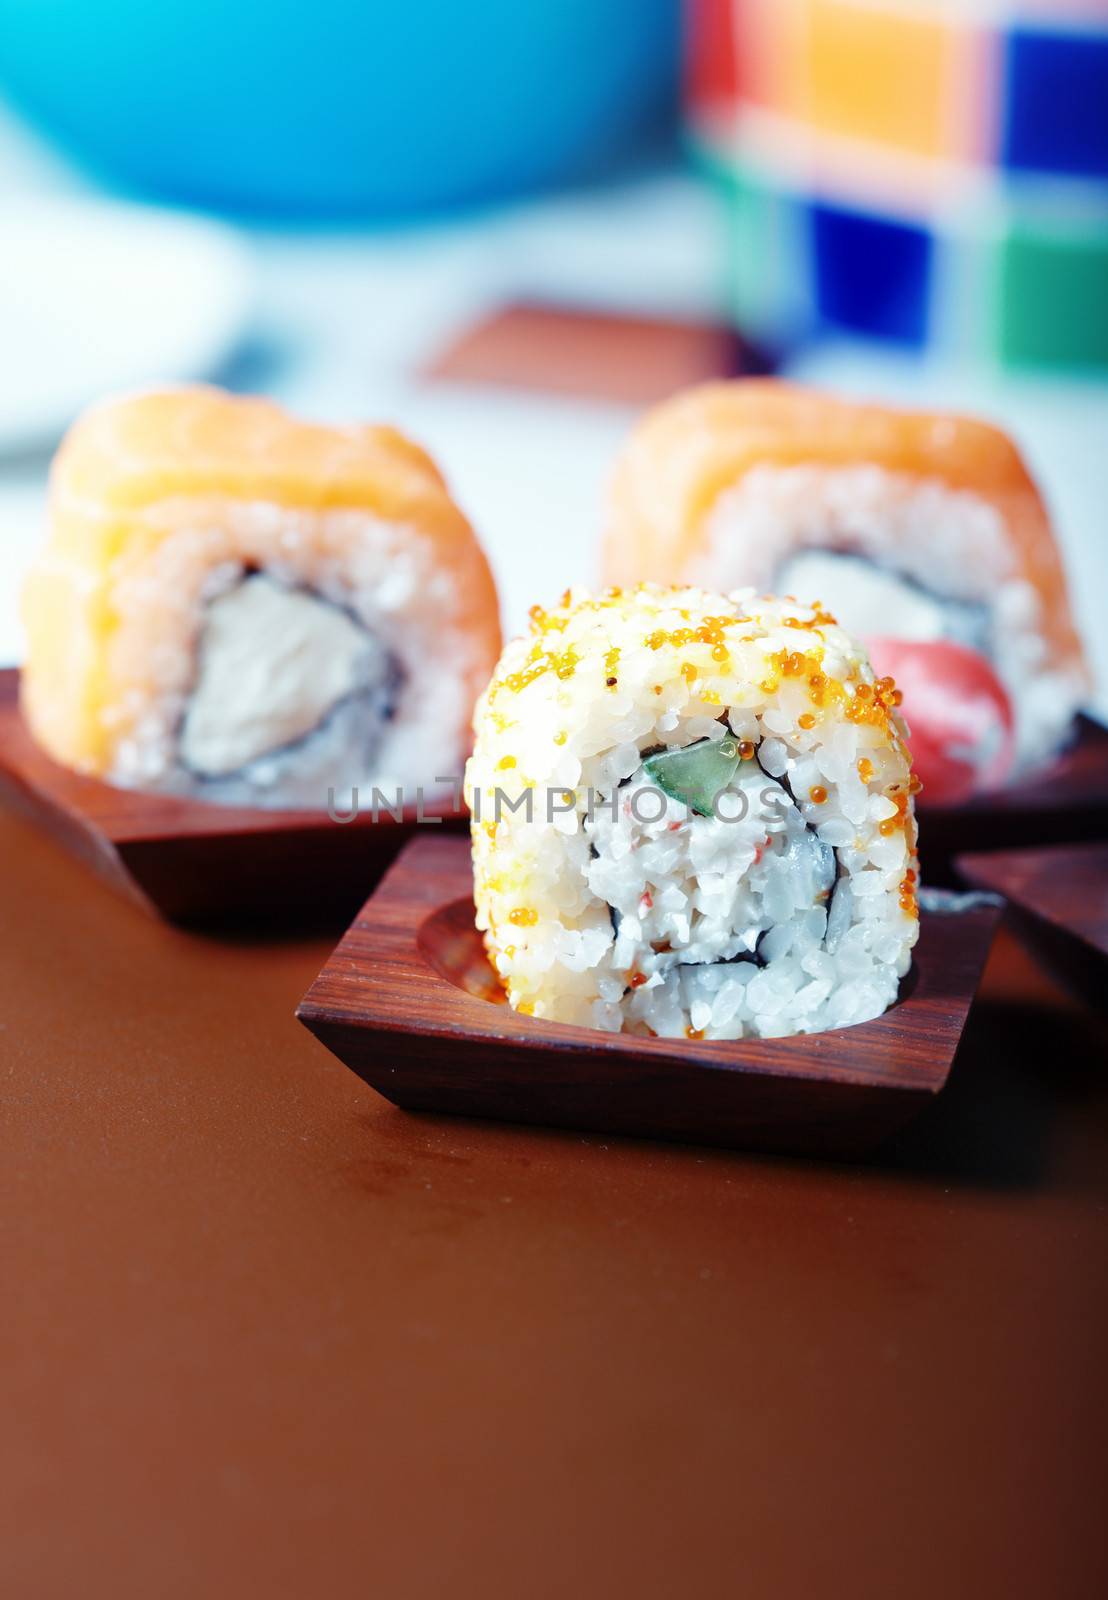 Sushi on the table. Vertical photo with natural colors. Shallow depth of field added for natural view